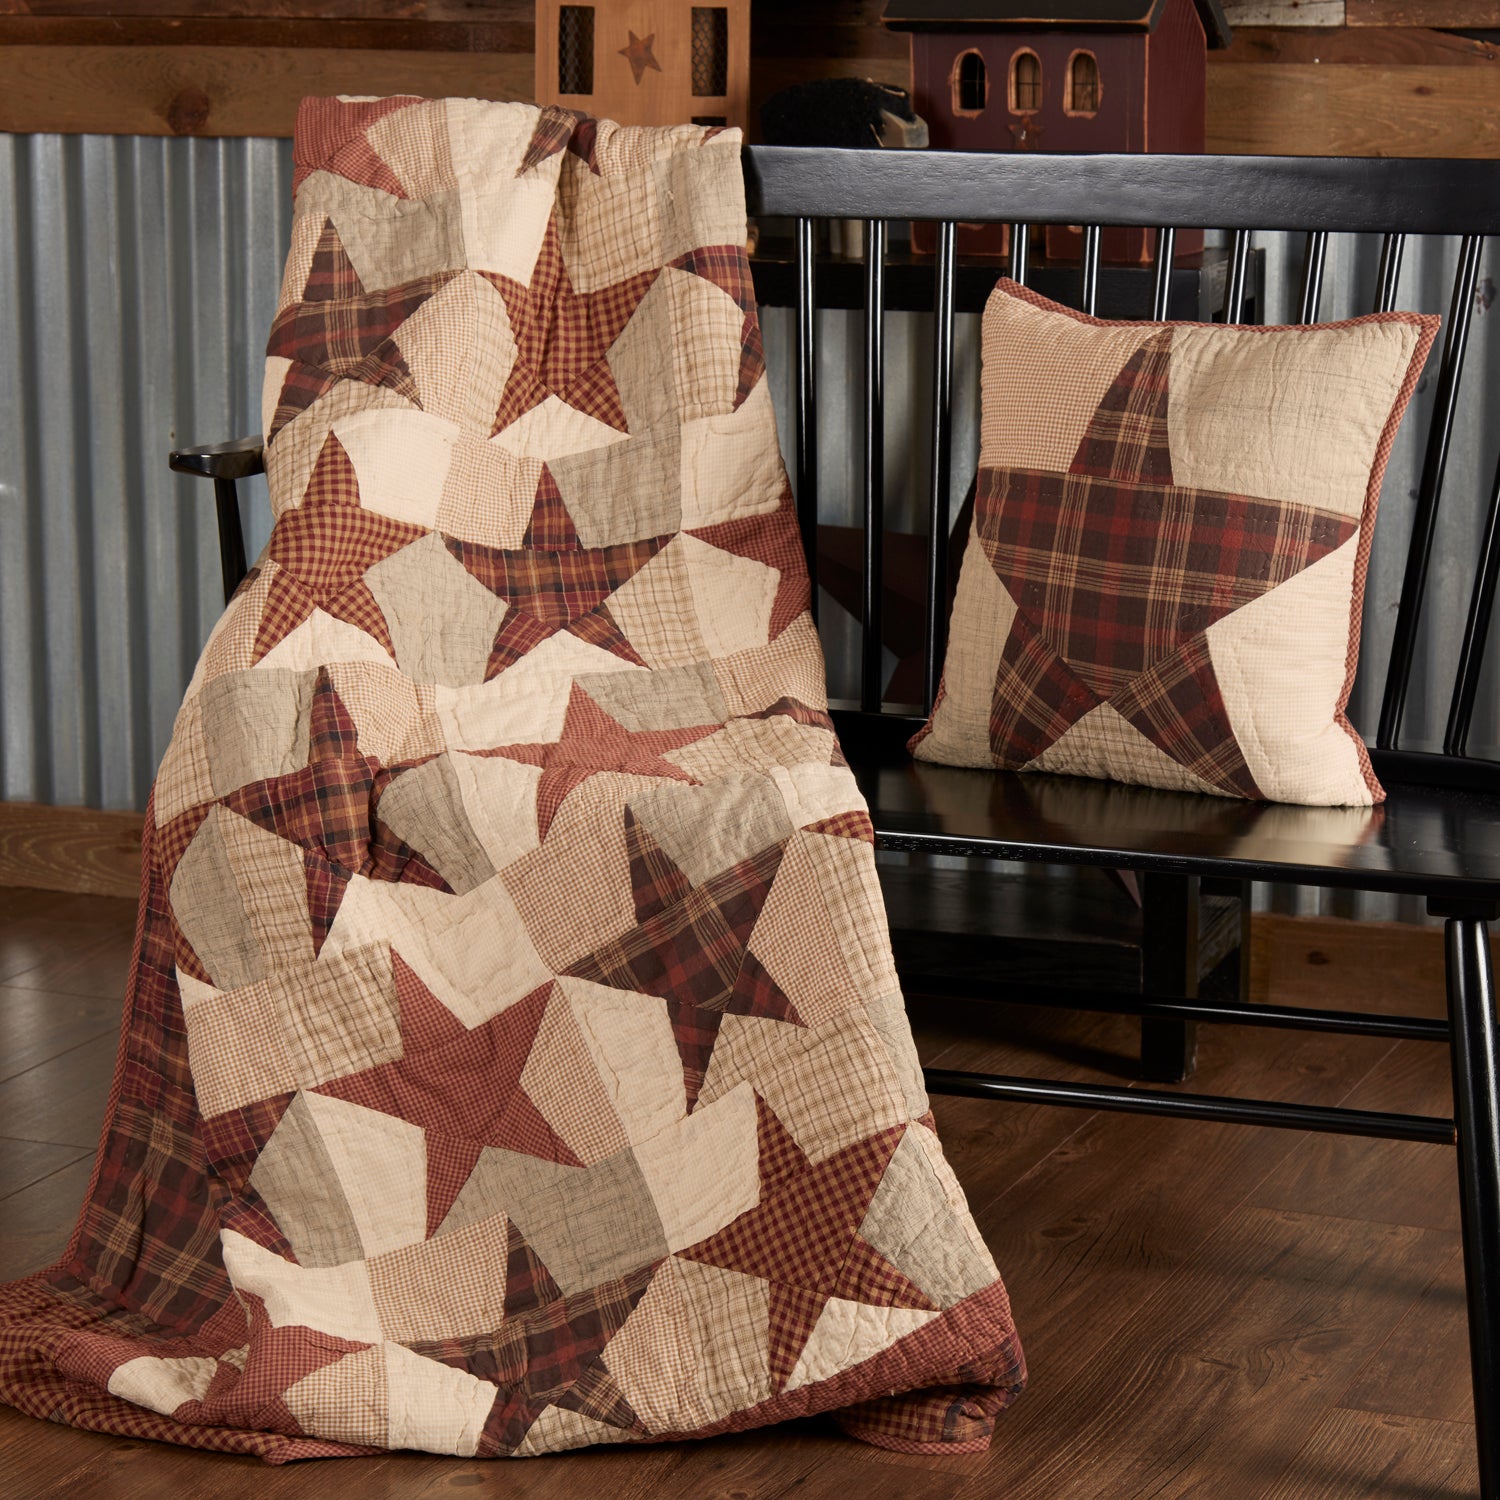 19977-Abilene-Star-Quilted-Throw-70x55-image-3